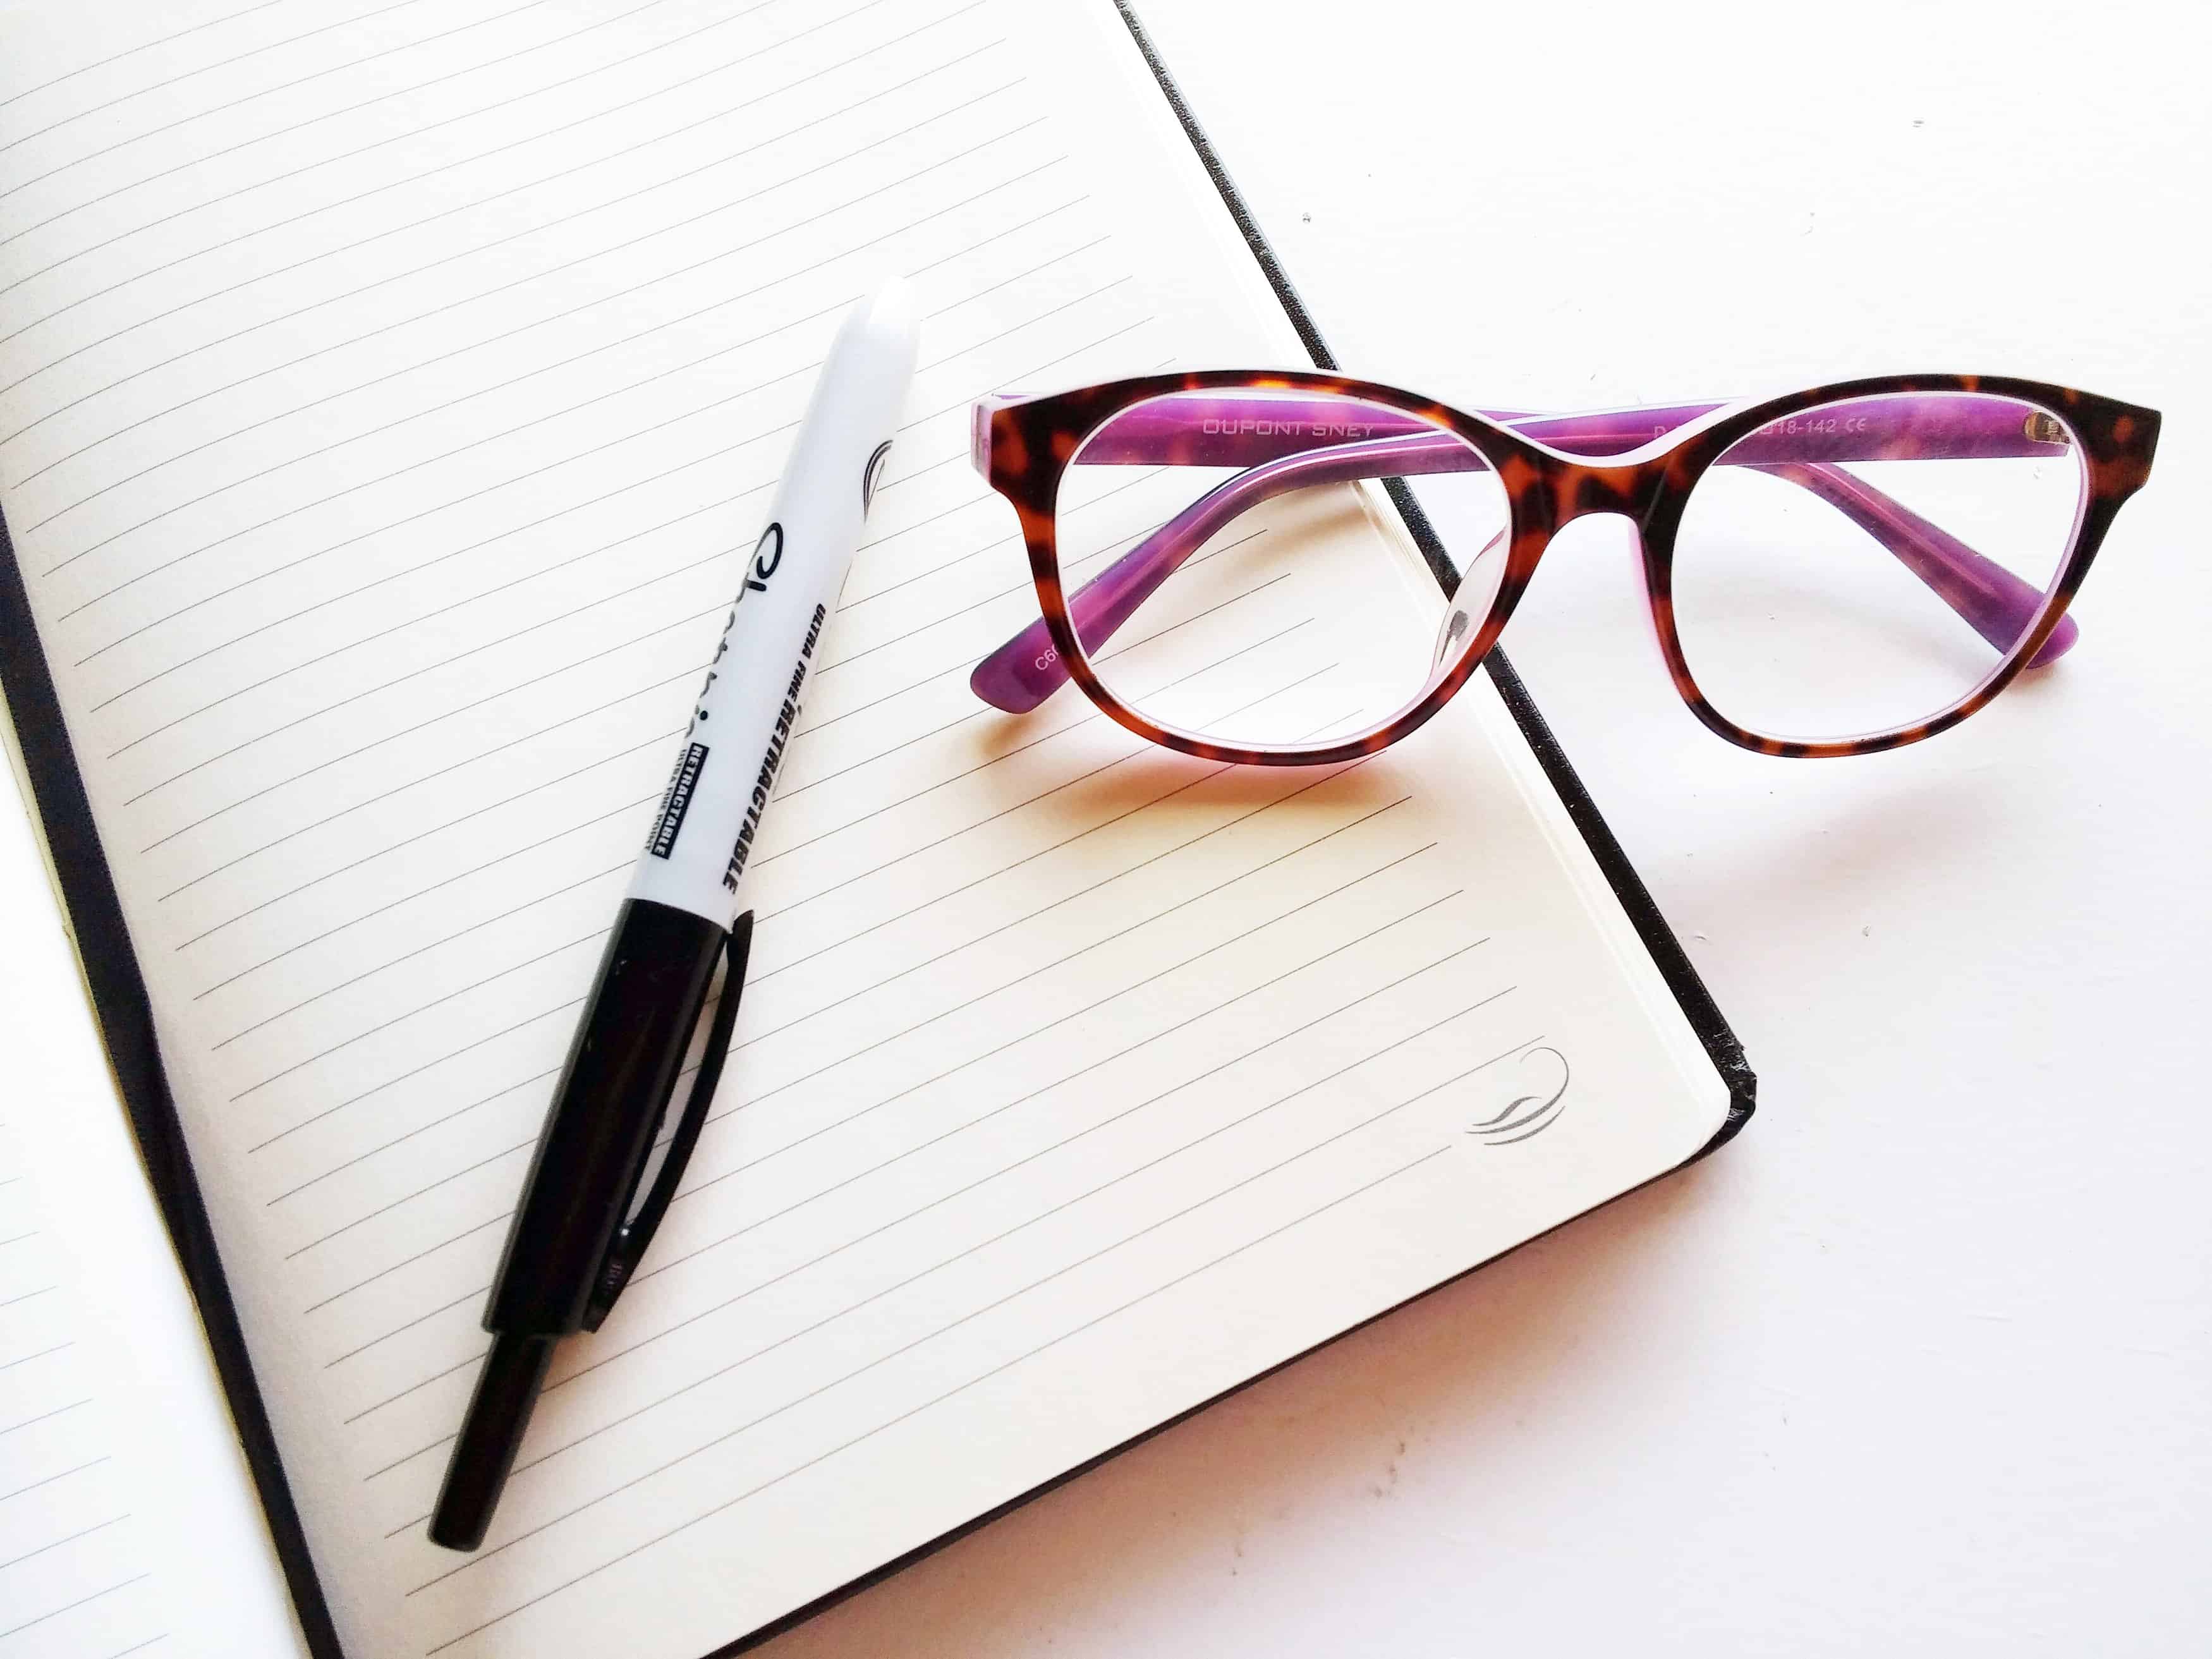 Notebook and glasses